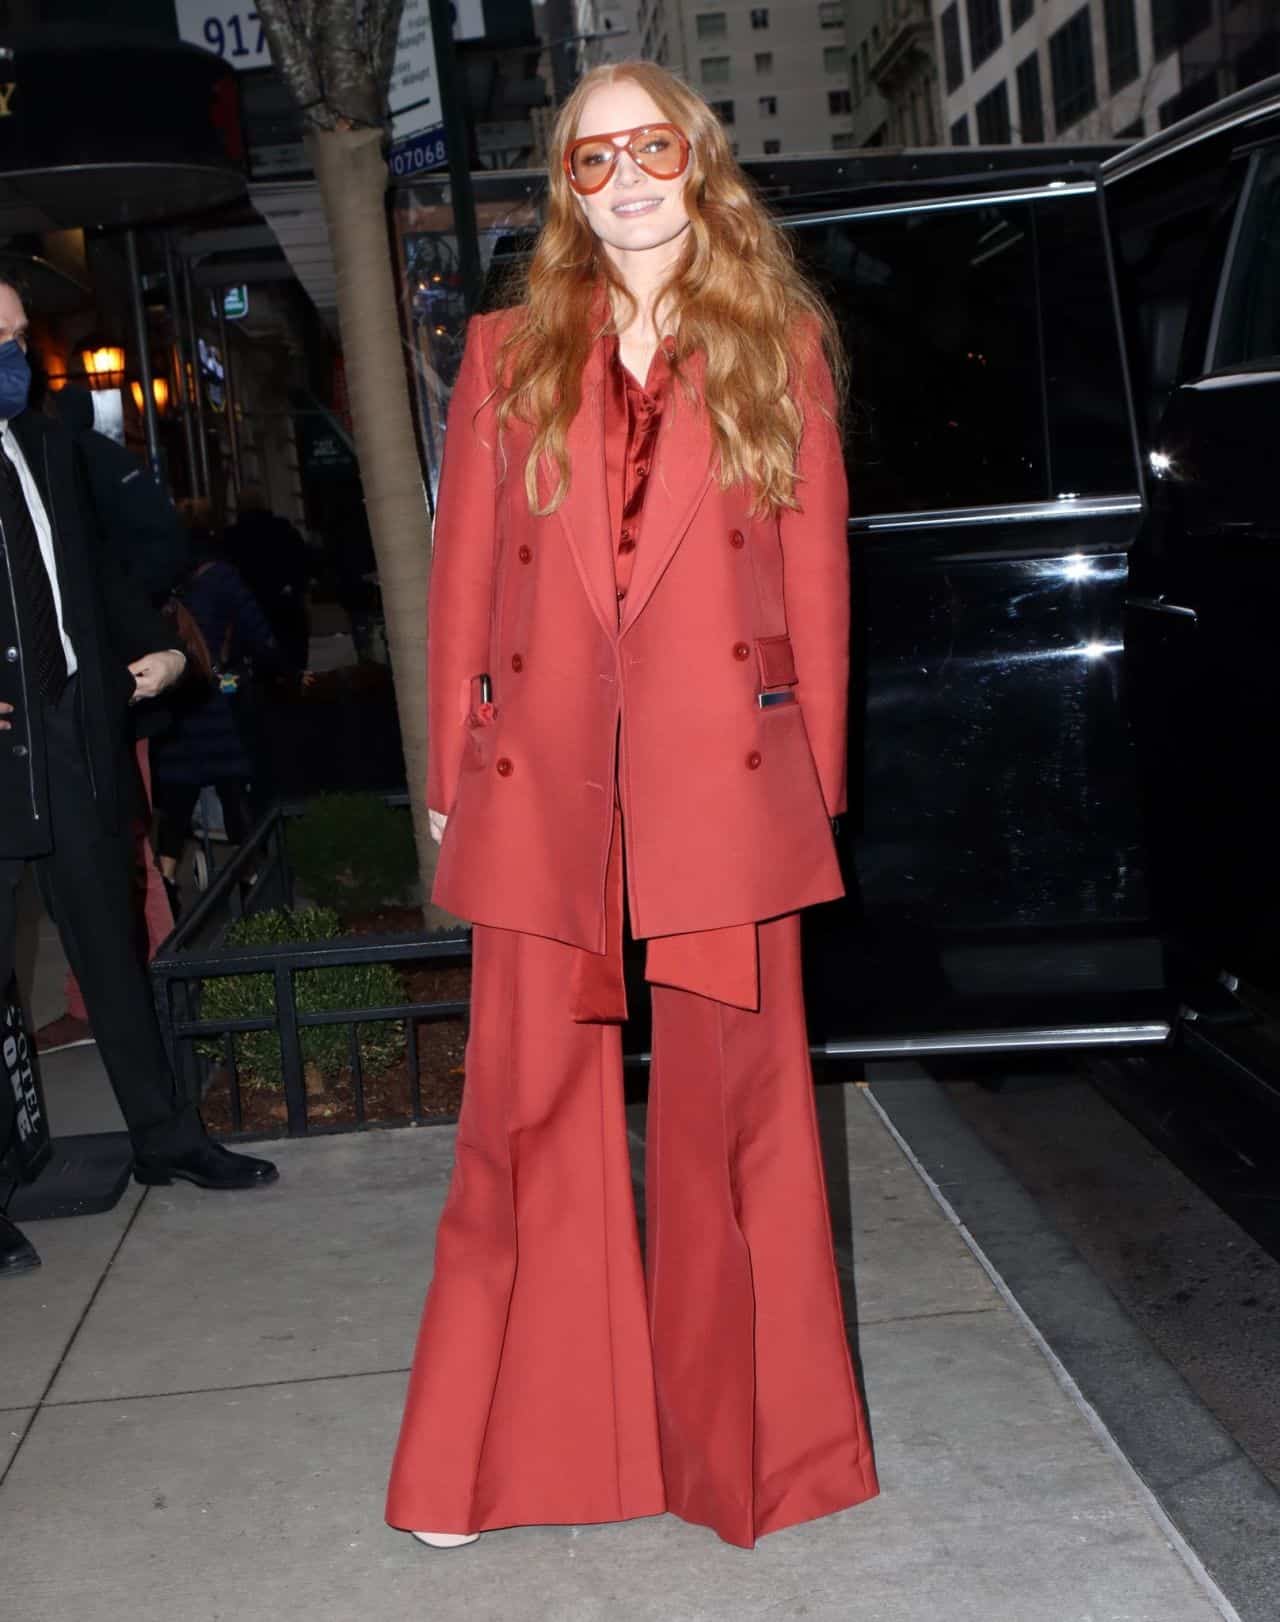 Jessica Chastain Rocks Red 70s-Style Suit at "George & Tammy" Screening in New York